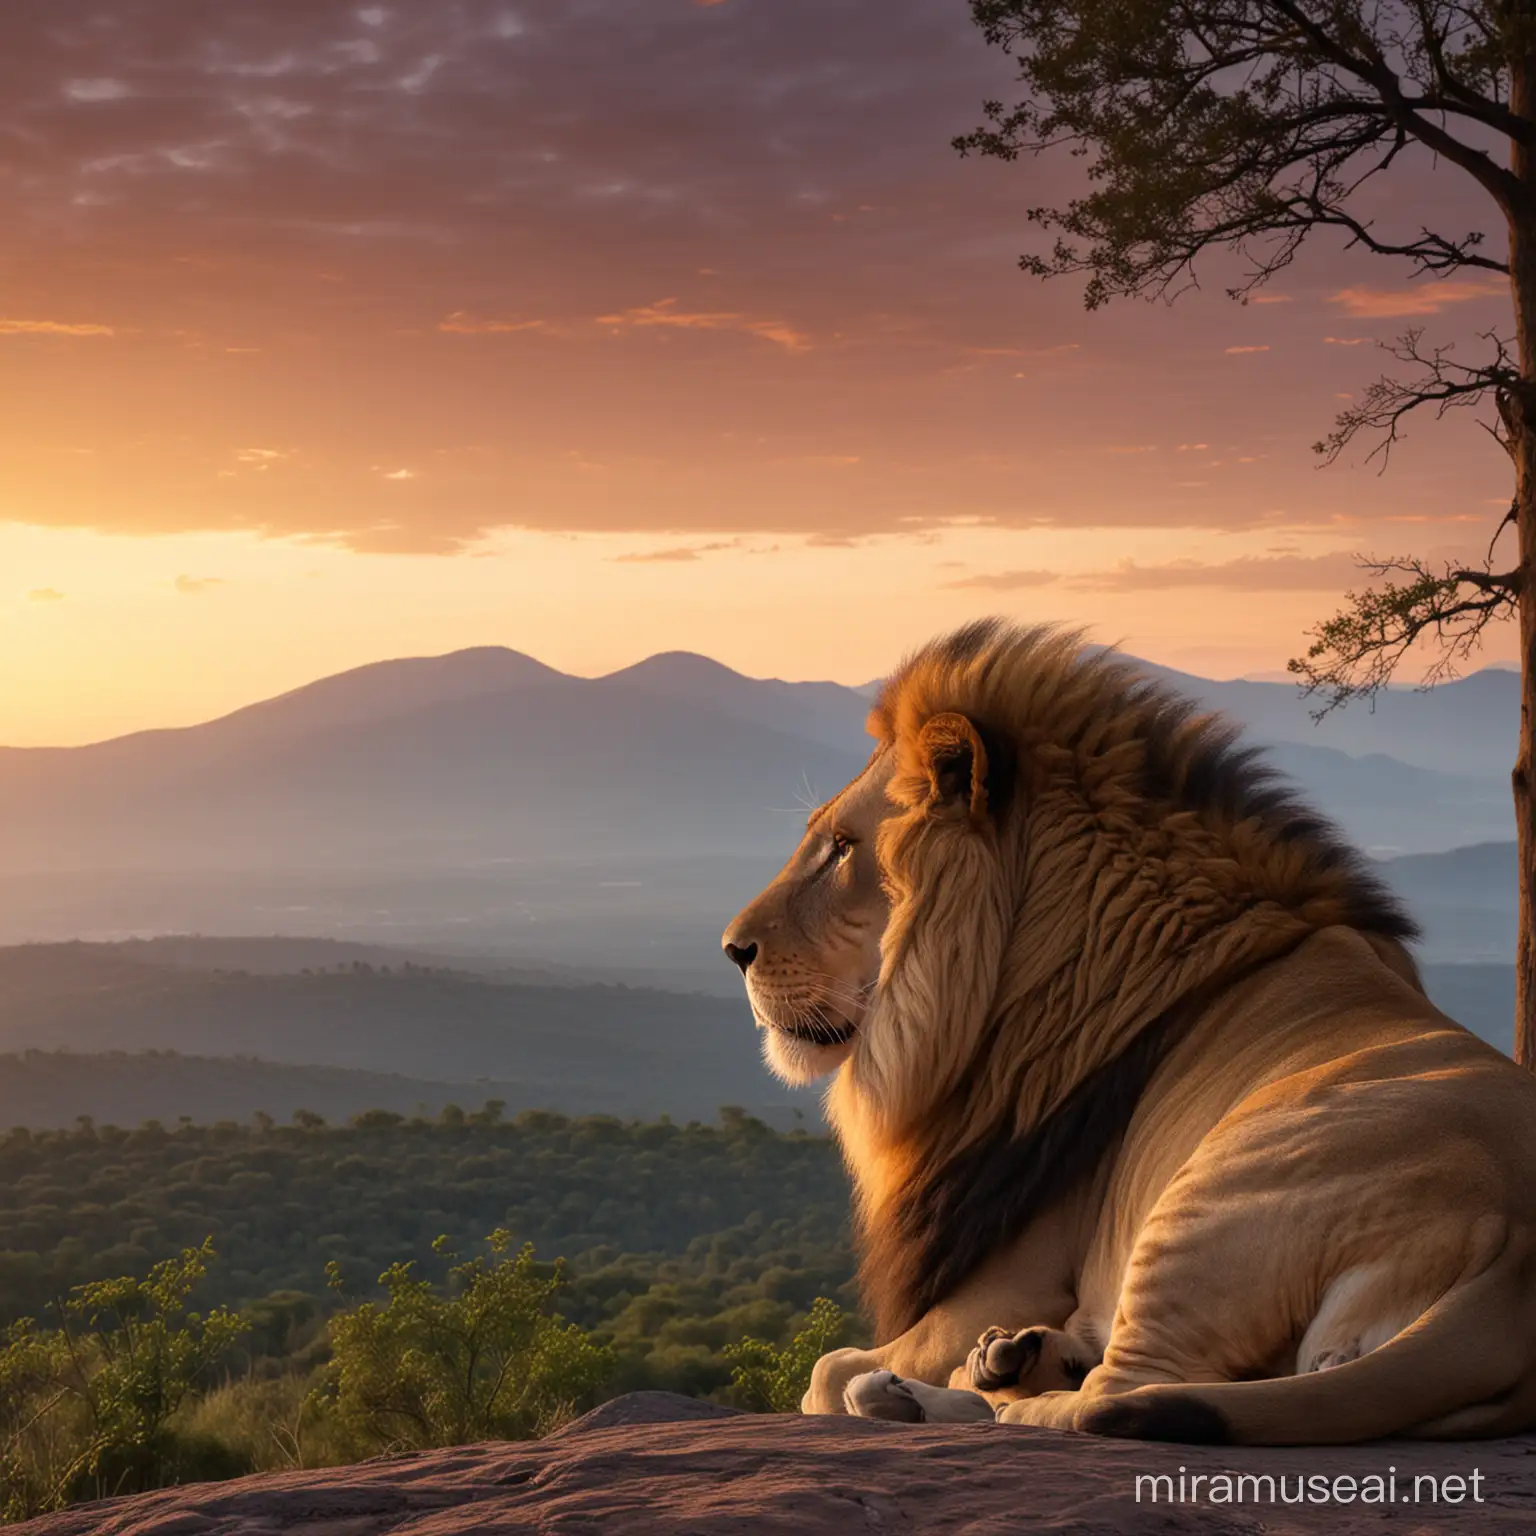 Majestic Lion Contemplating Sunset in Forest Mountain Scene